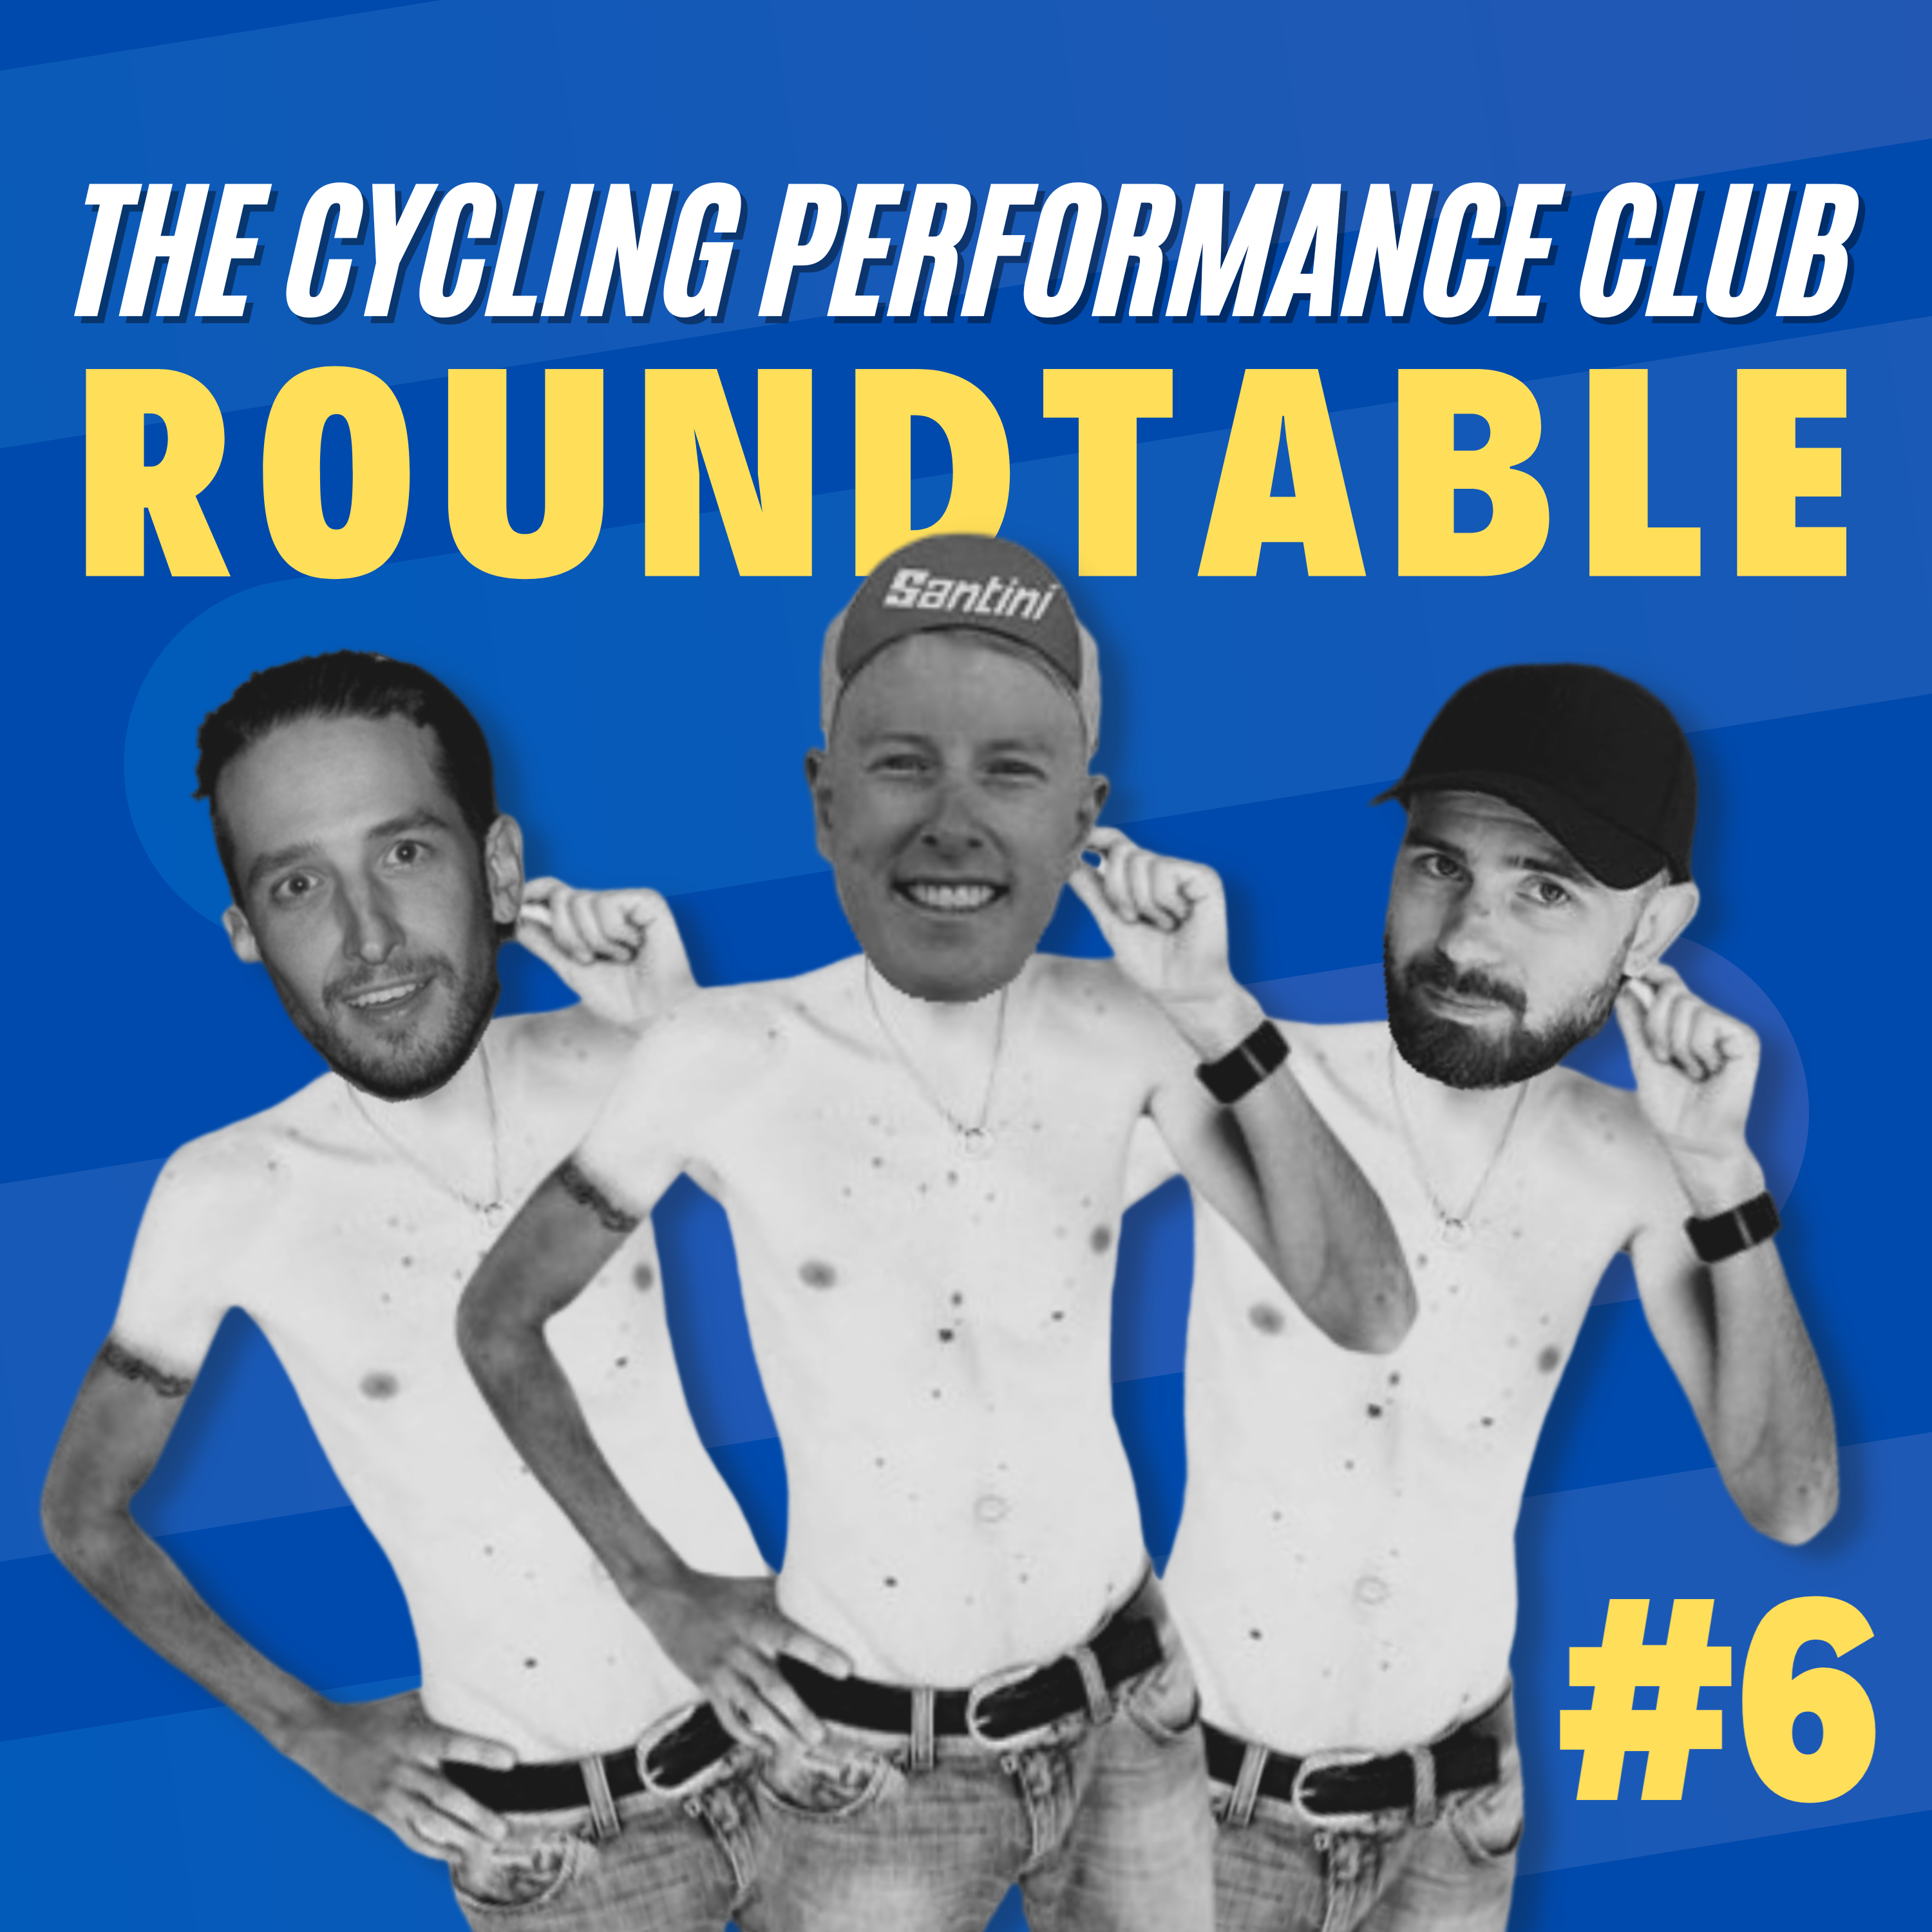 Roundtable #6 - Performance tips: Consistency, social riding, braking, cold weather riding, and much more!